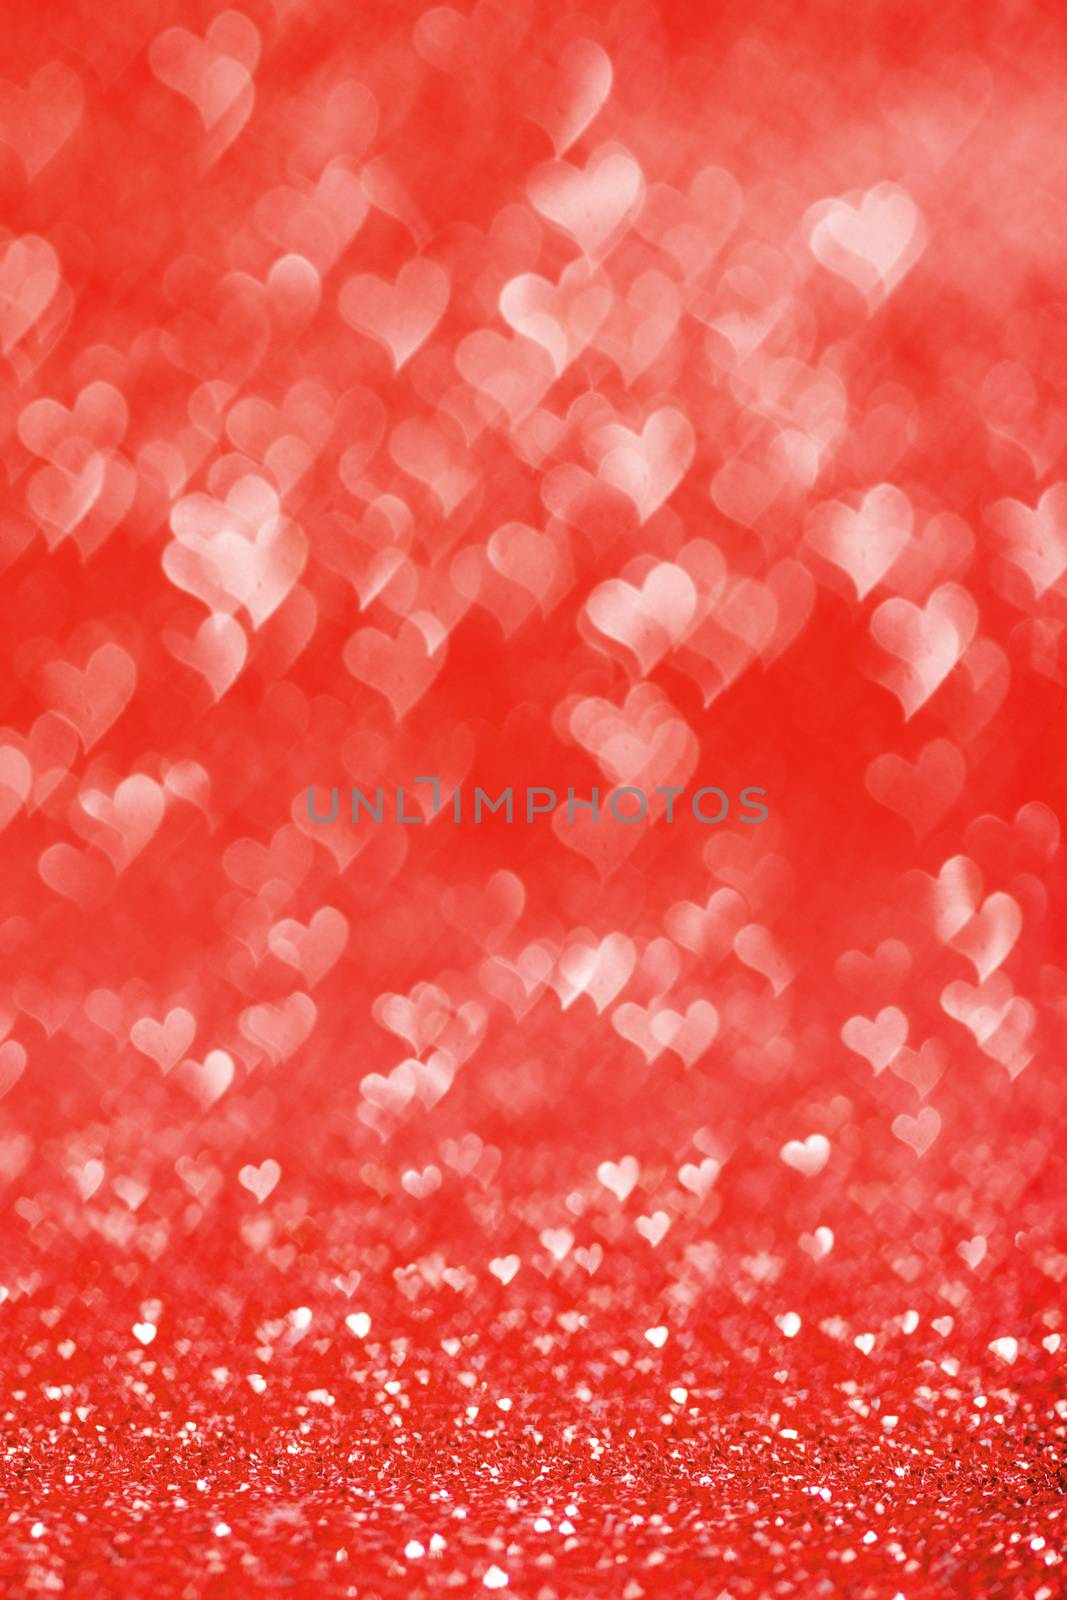 Shiny red heart lights background by Yellowj